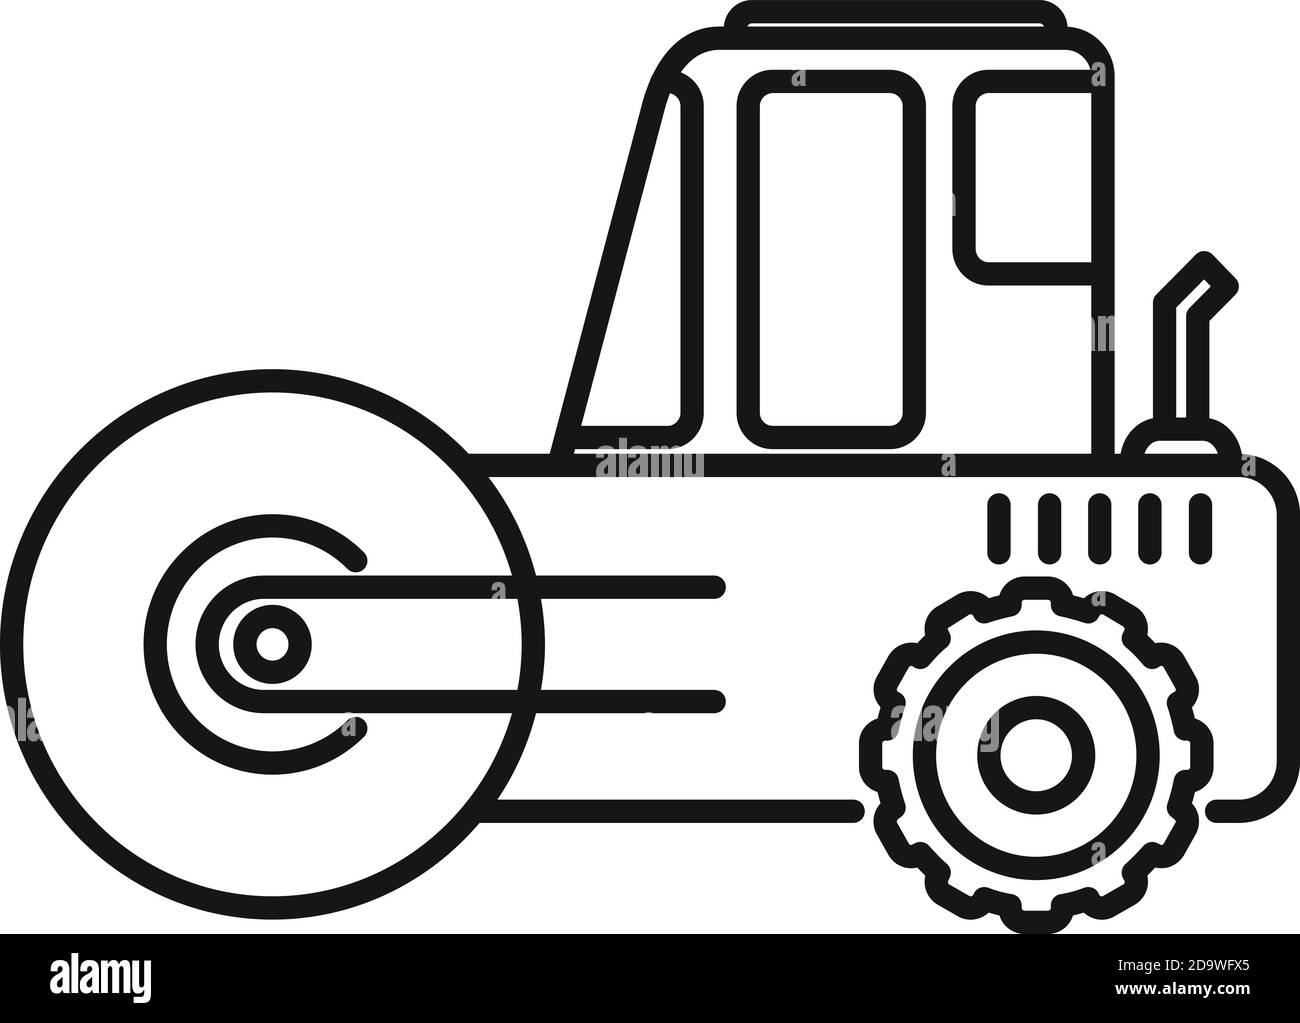 Heavy road roller icon, outline style Stock Vector